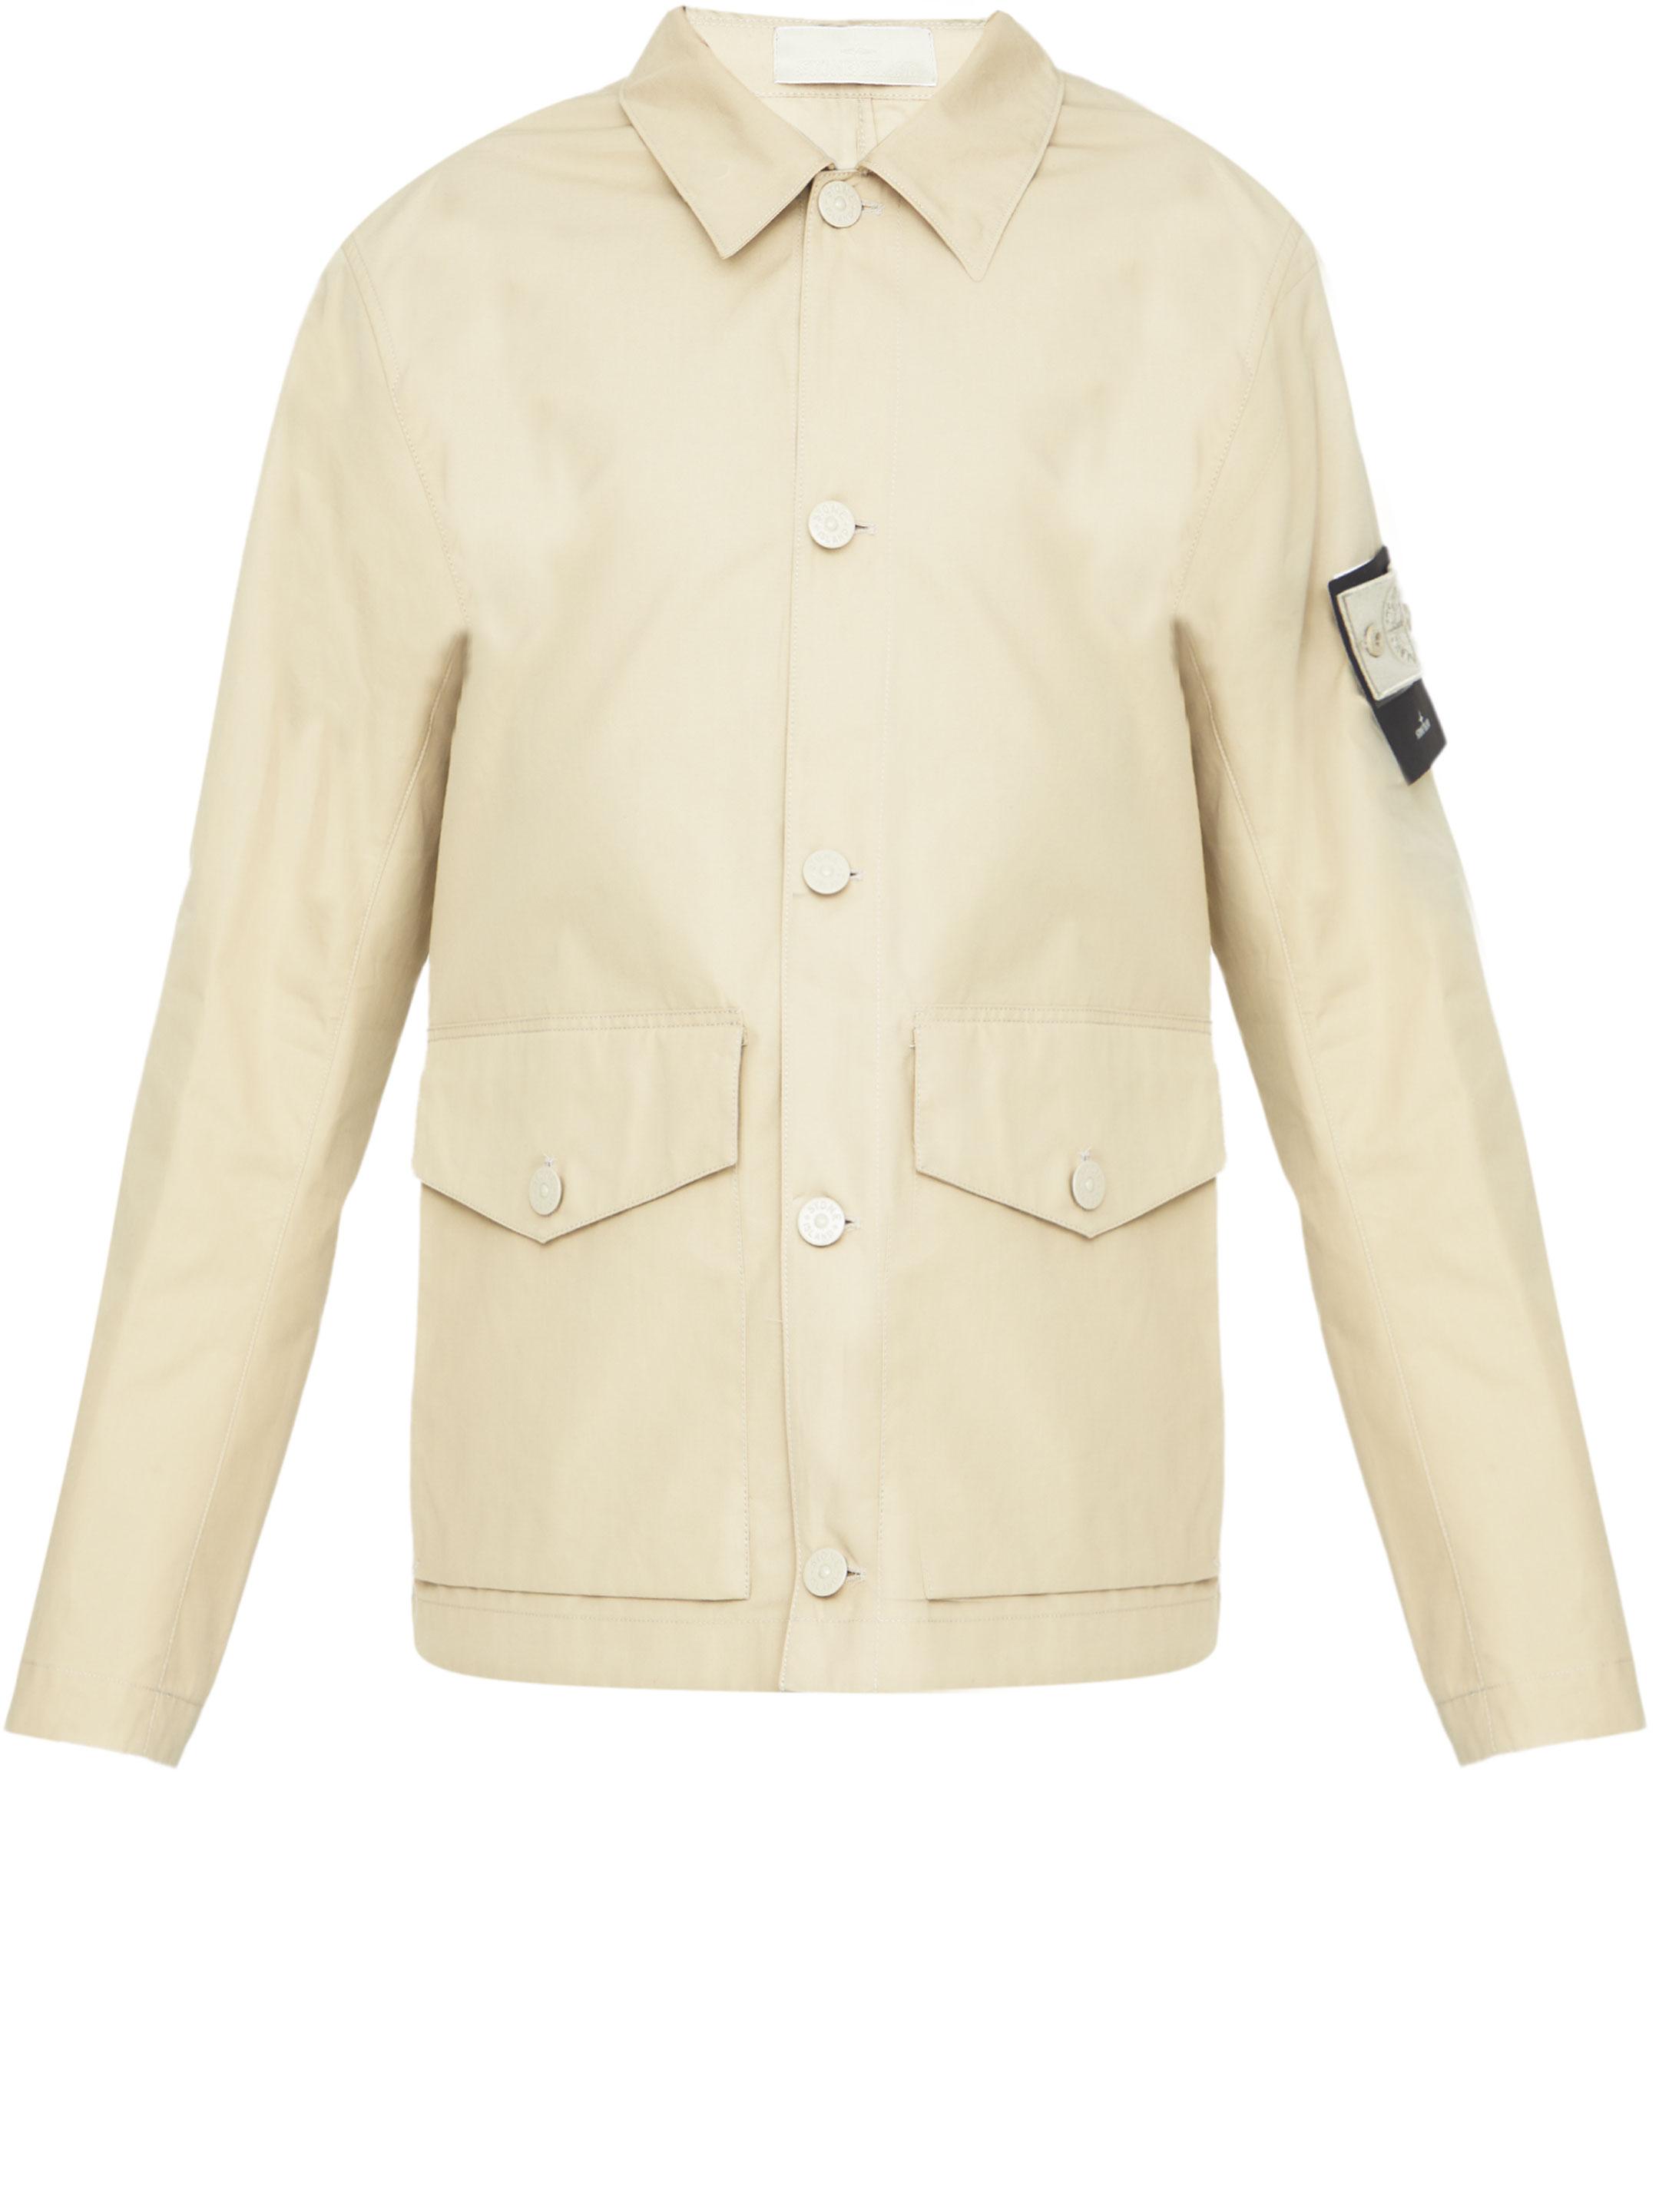 Stone Island Ghost Piece O-ventile Jacket in Natural for Men | Lyst Canada